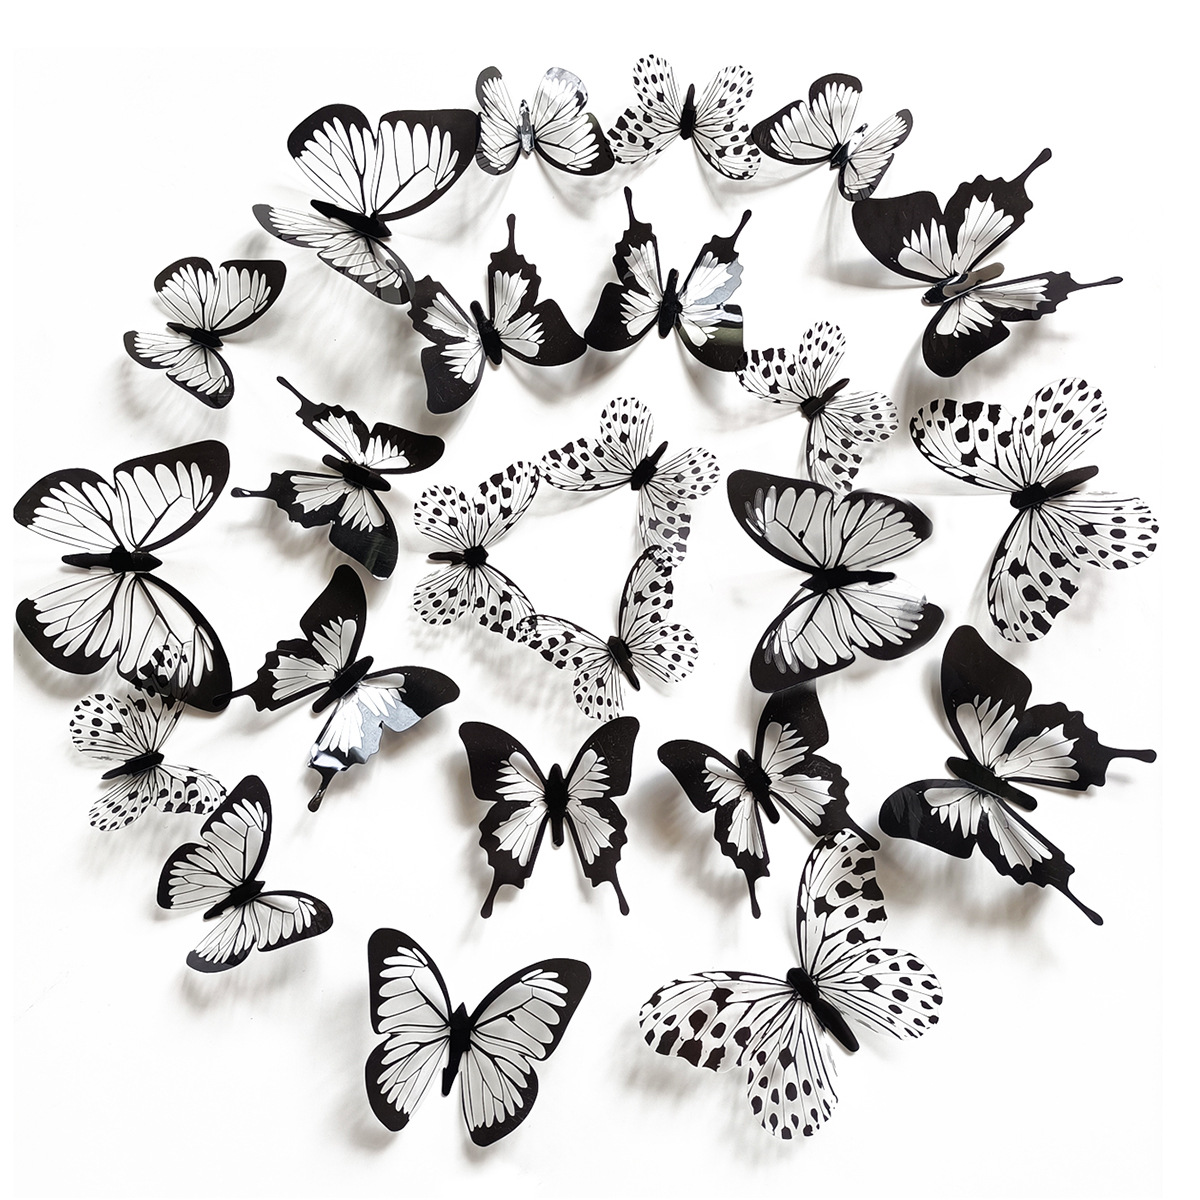 24 PCS 3D Colorful Crystal Butterfly Wall Stickers with Adhesive Art Decal Satin Paper Butterflies Baby Kids Bedroom Home DIY Decor Removable Sticker